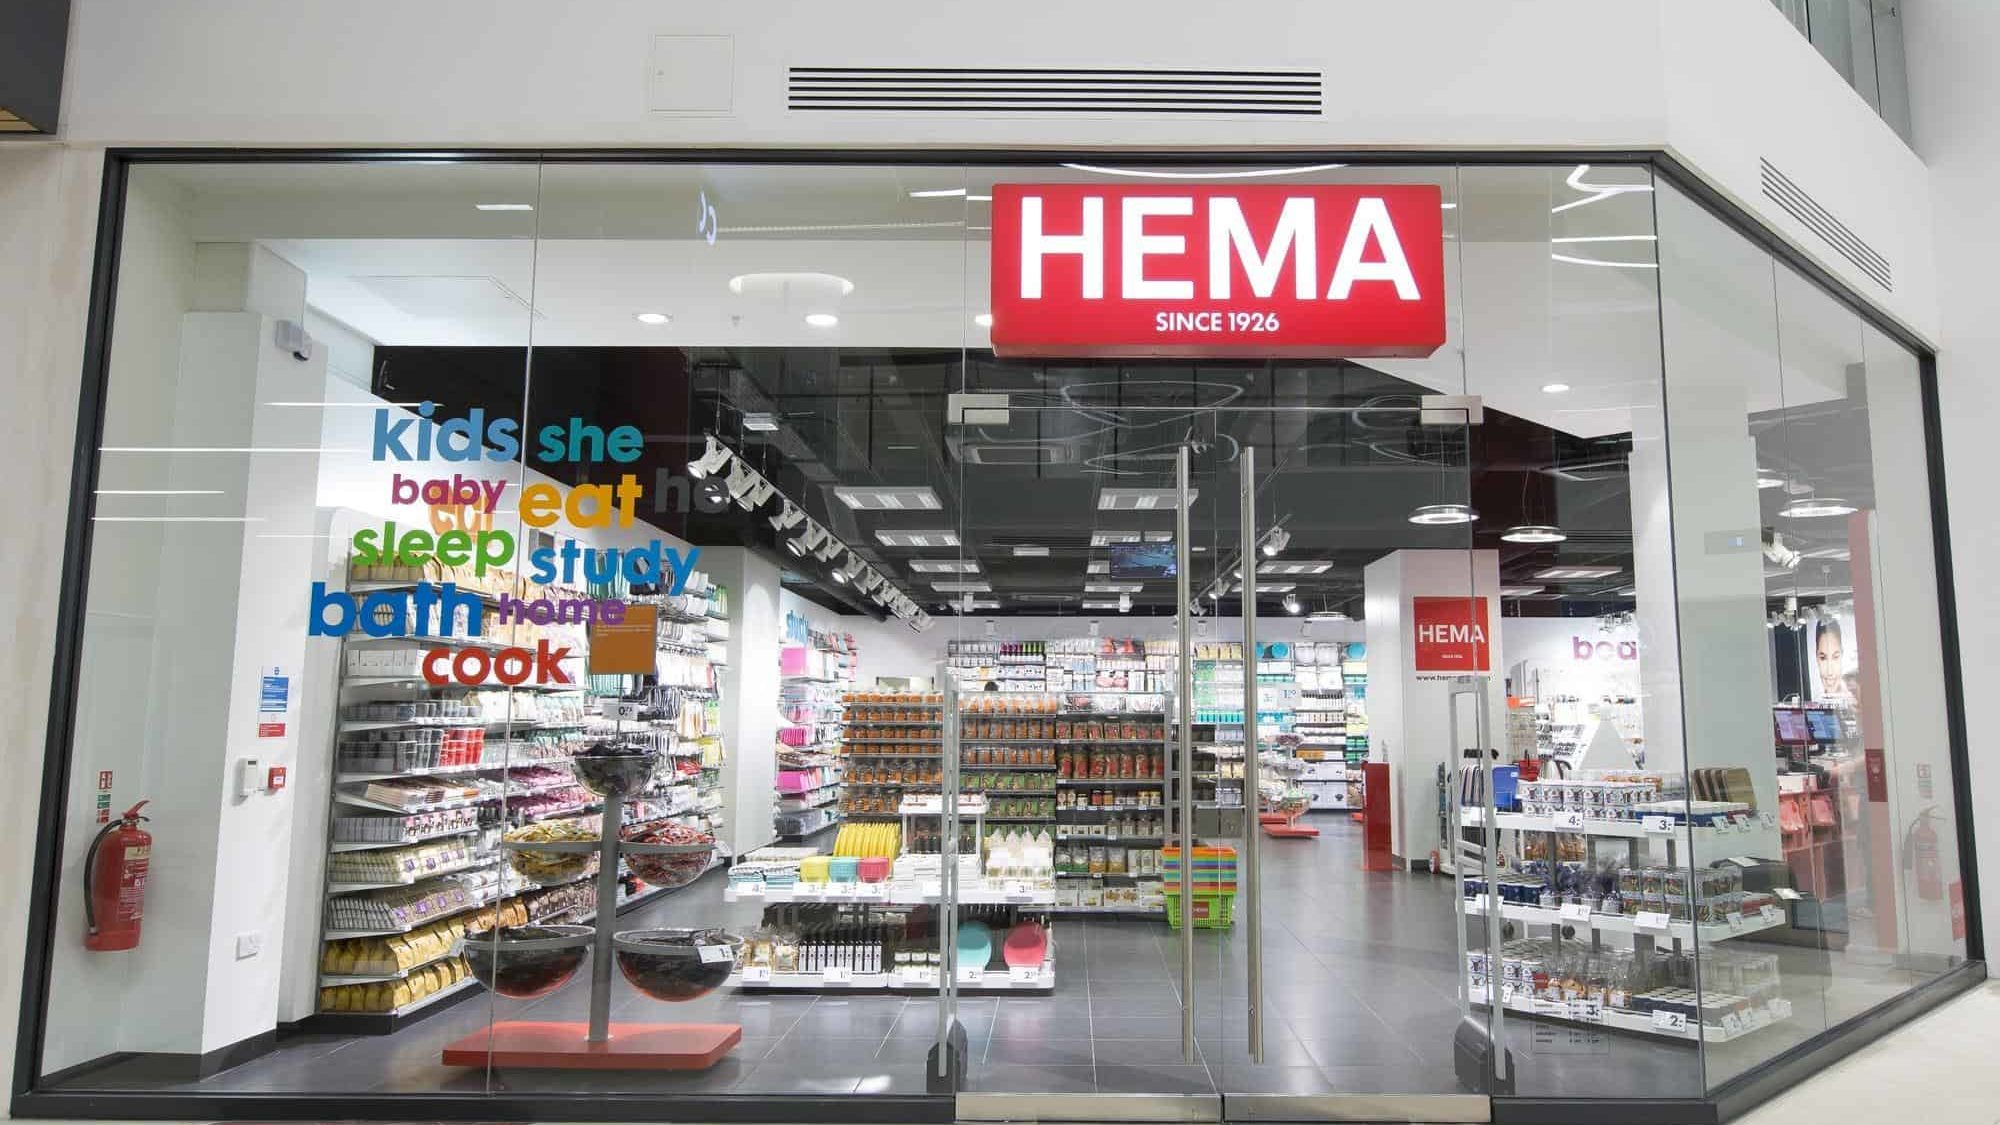 HEMA acquired from Lion Capital